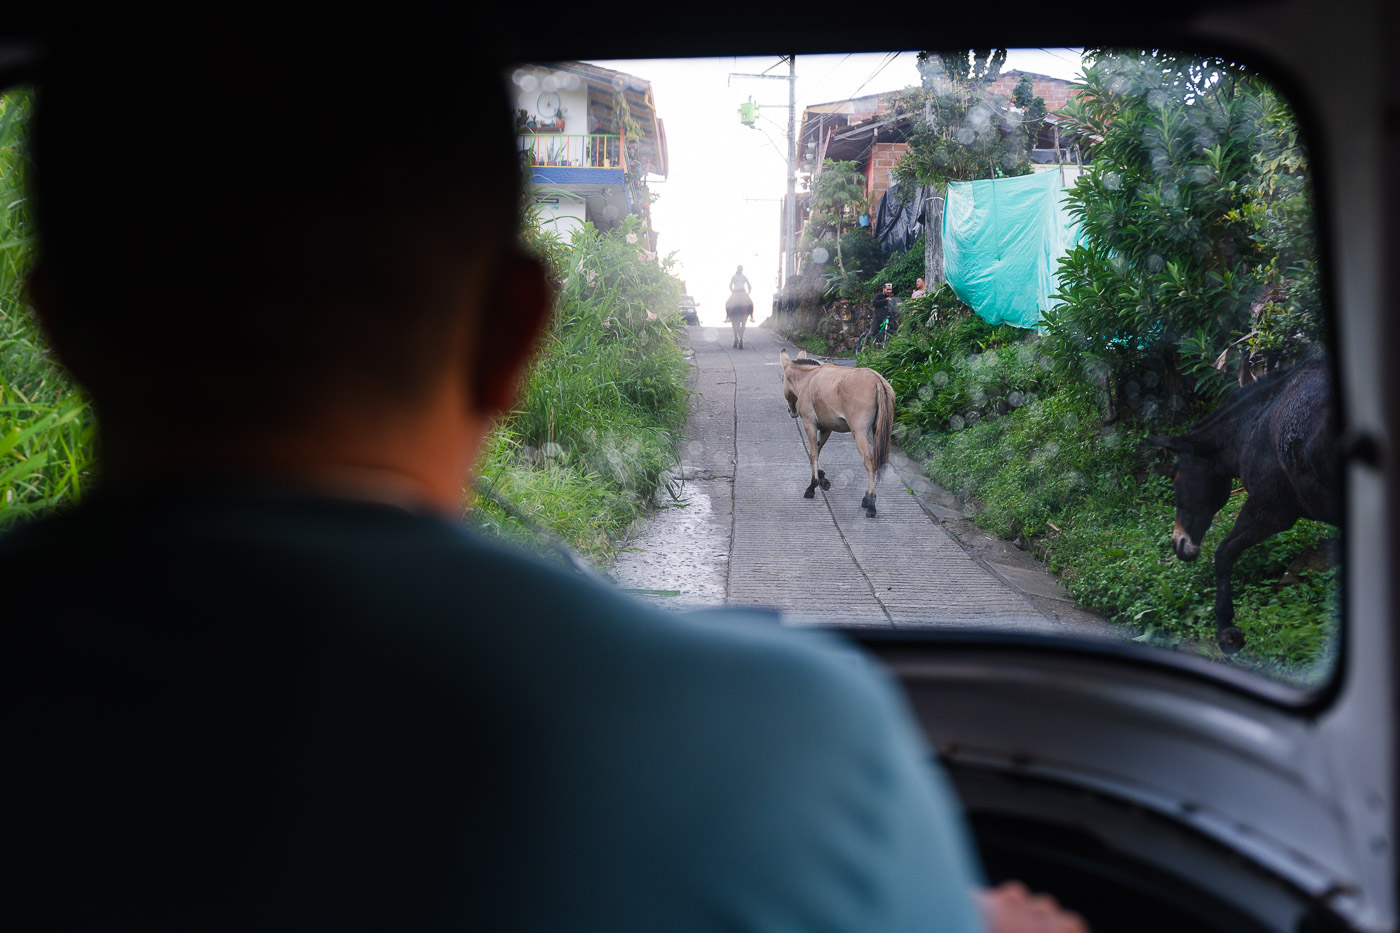 A tuk tuk driver lookout out through the front of a vehicle at some horses blocking the road.